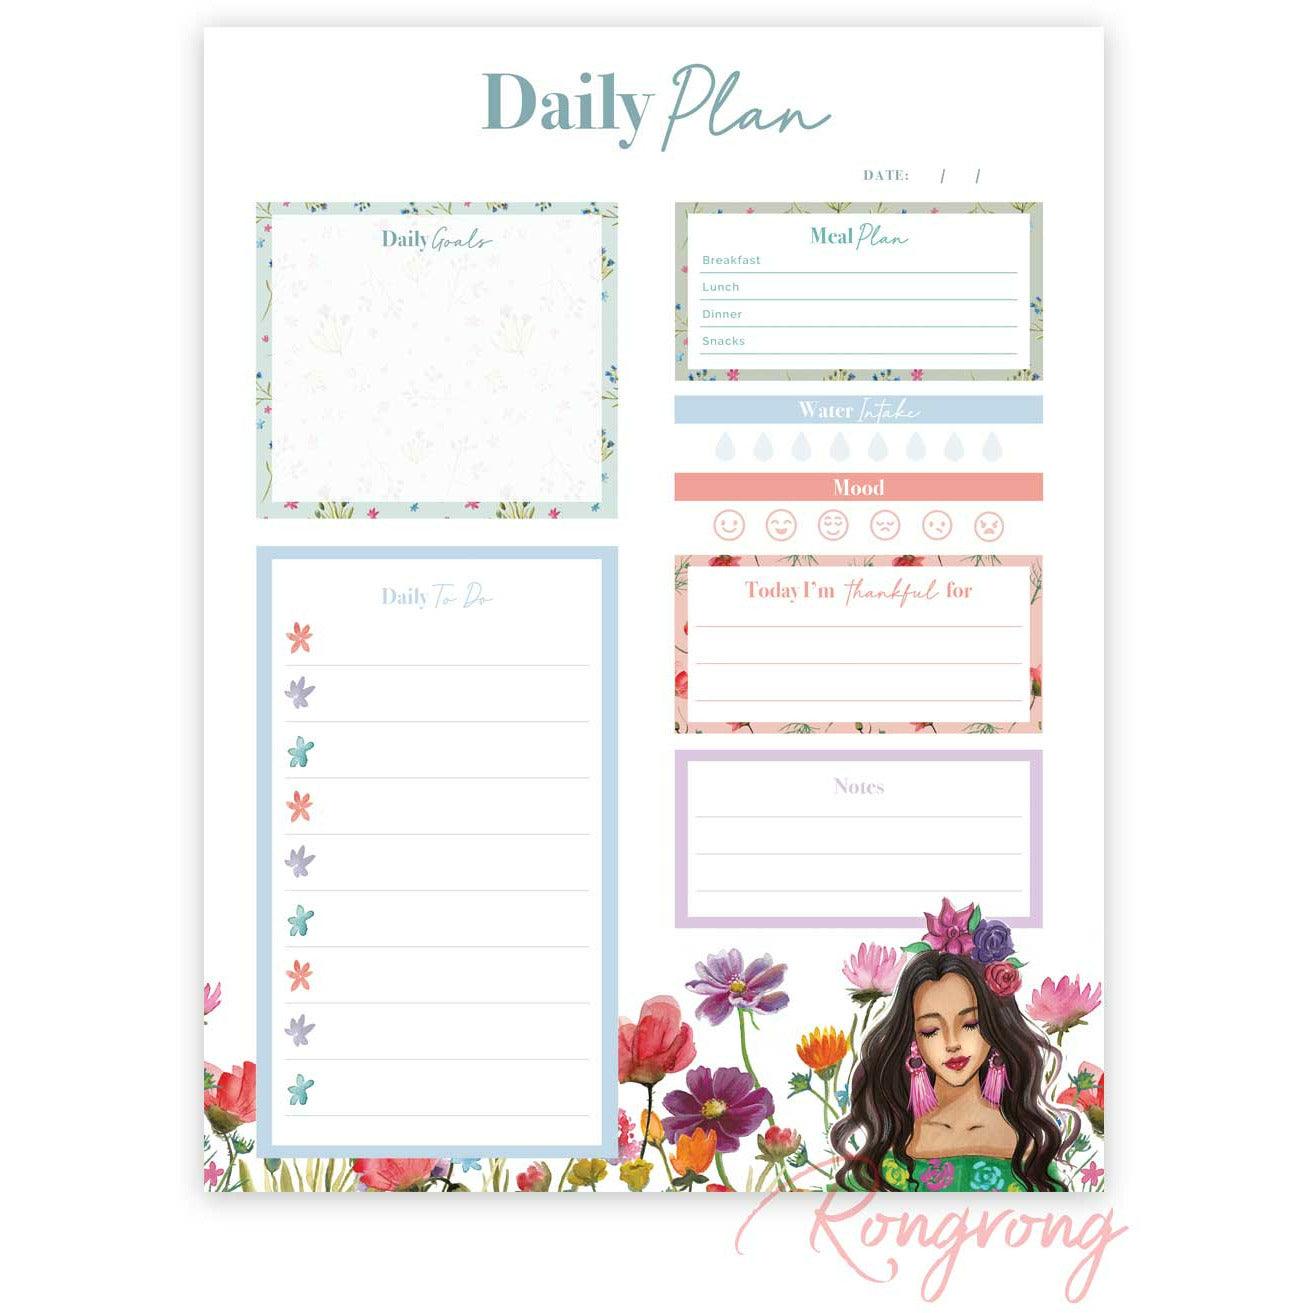 The Flower Child Daily Life Planner [DOWNLOAD] - Shop Rongrong